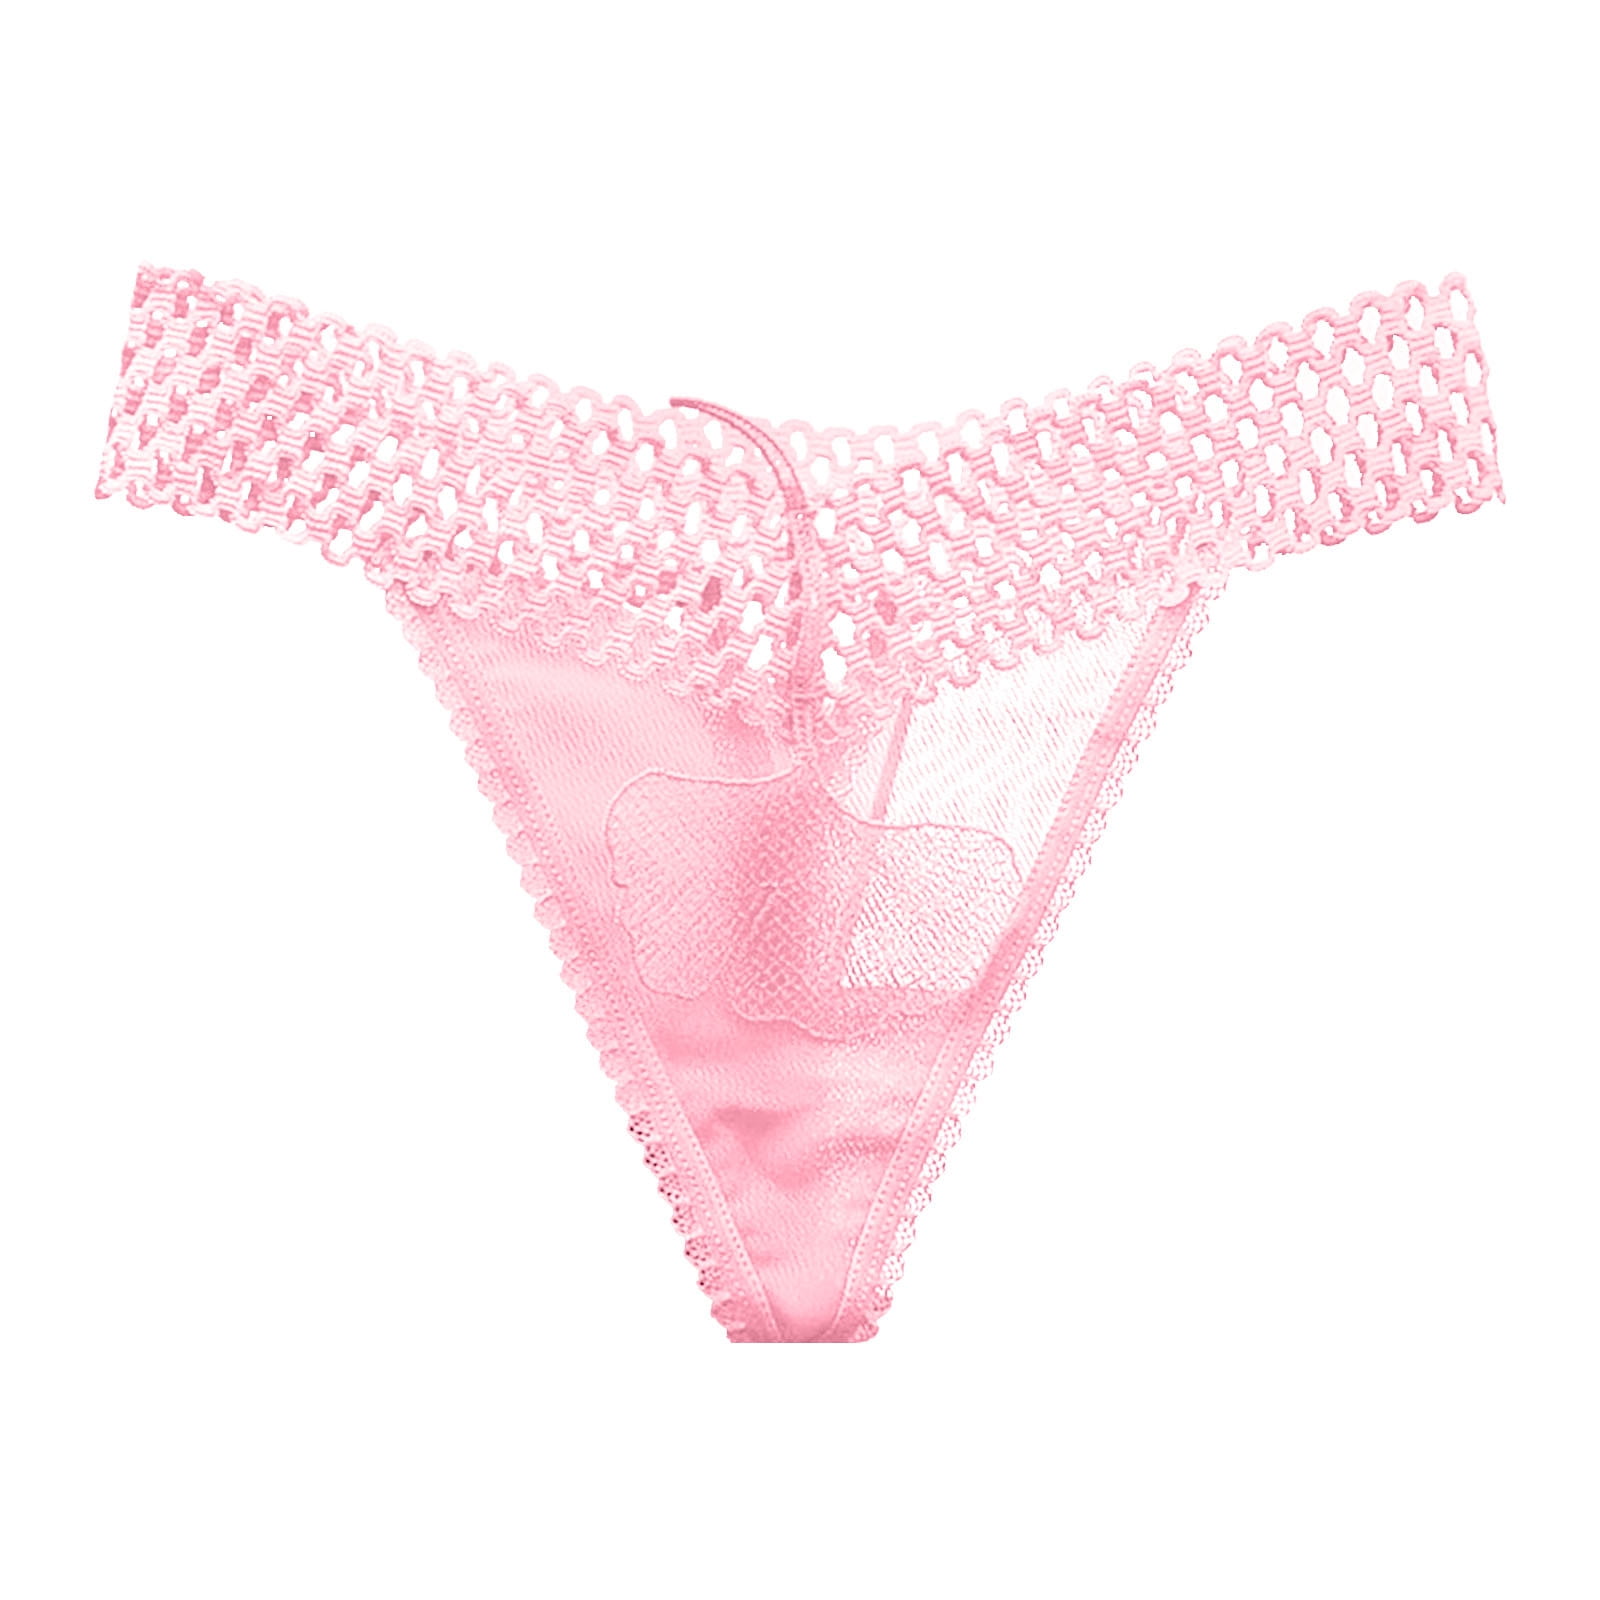 Brief Underwear For Women Womens Lace Panties Seamless Adjustable